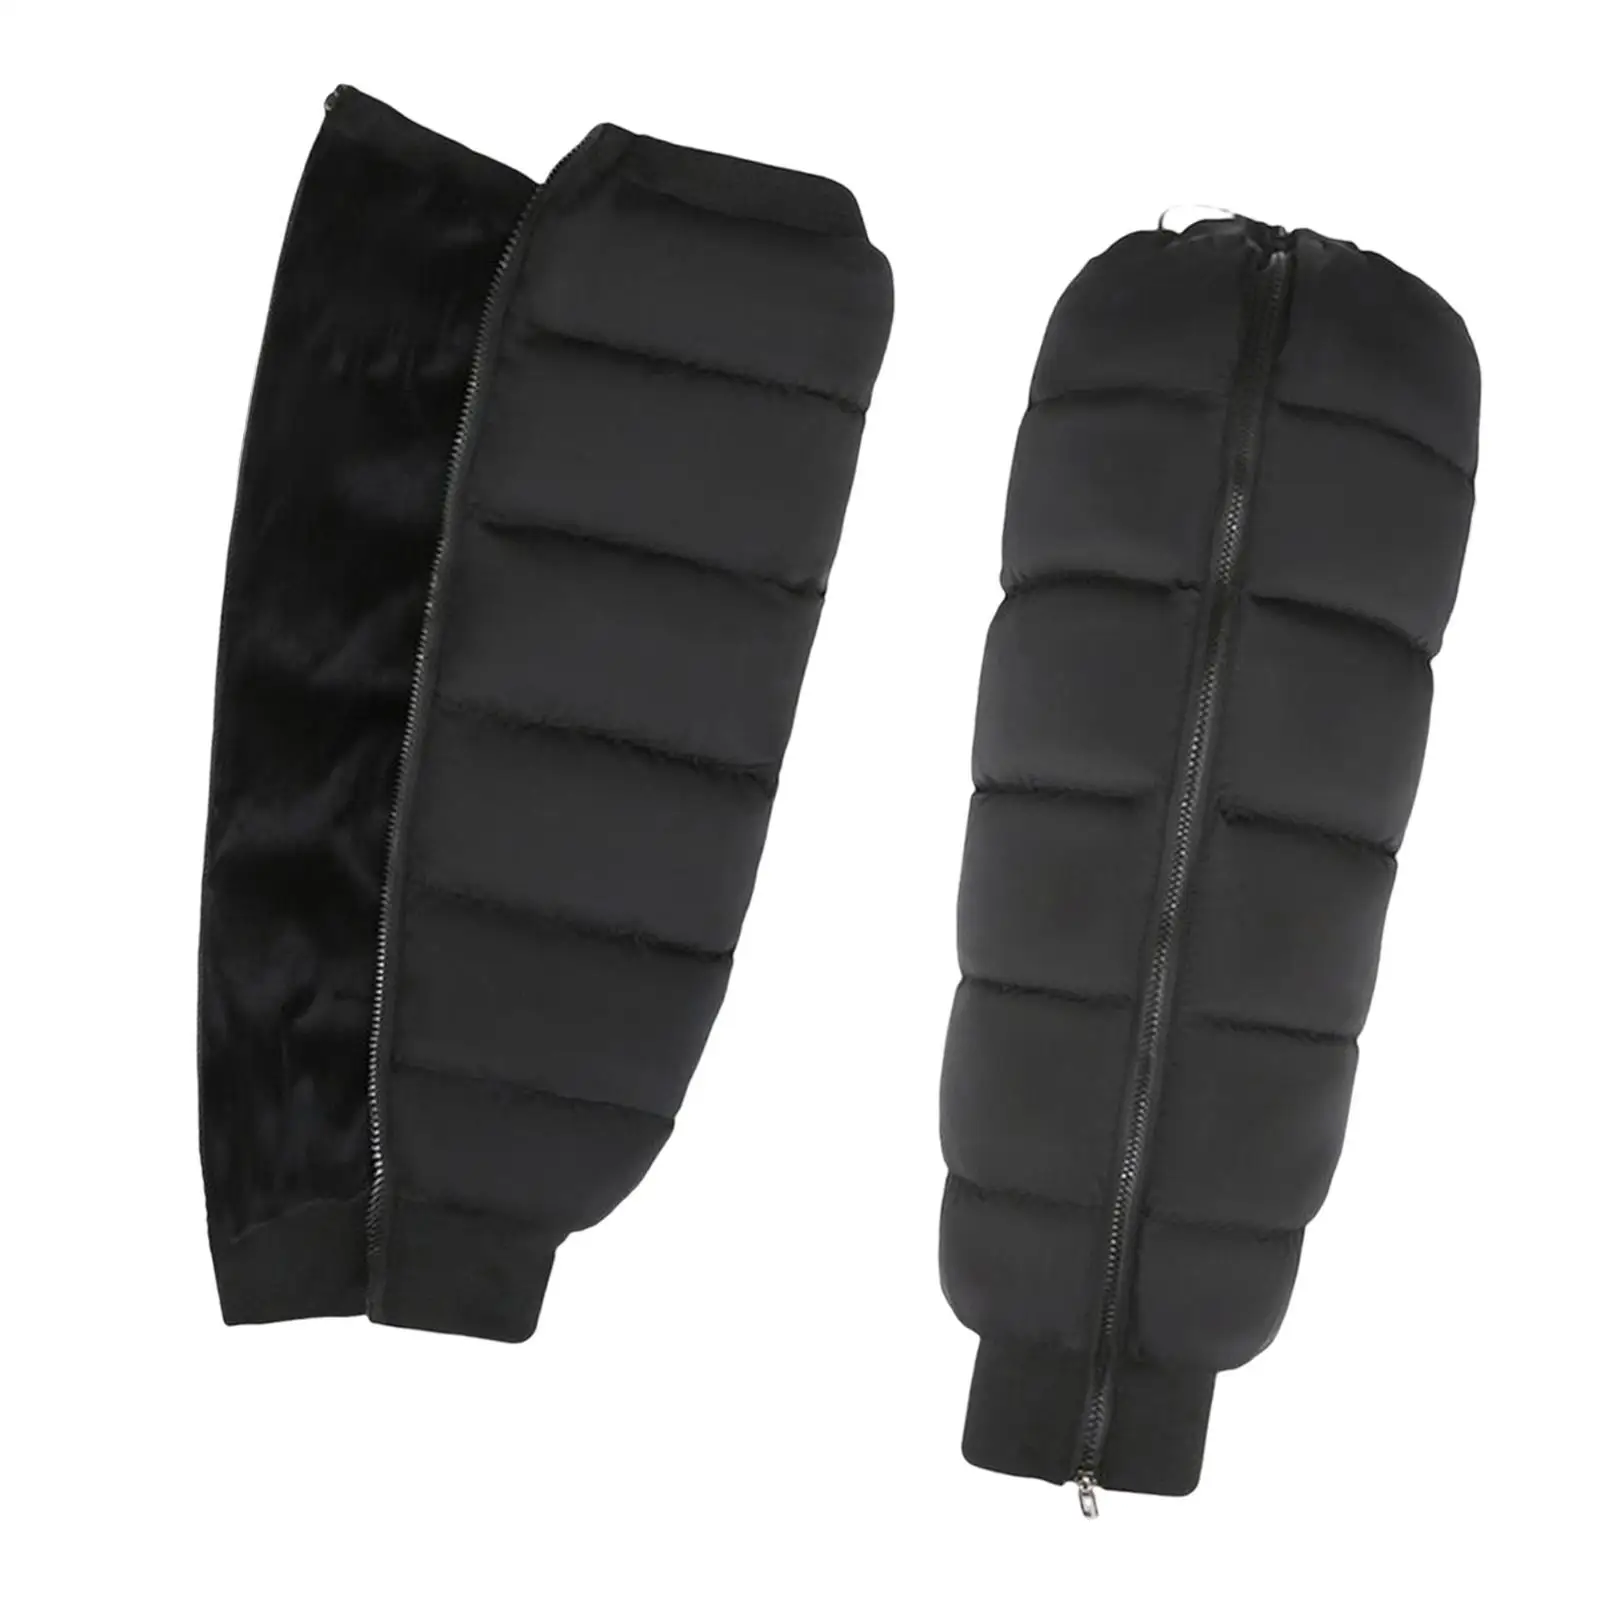 1 Pair Winter  Knee Pads Protective Protector Warmer for Skiing